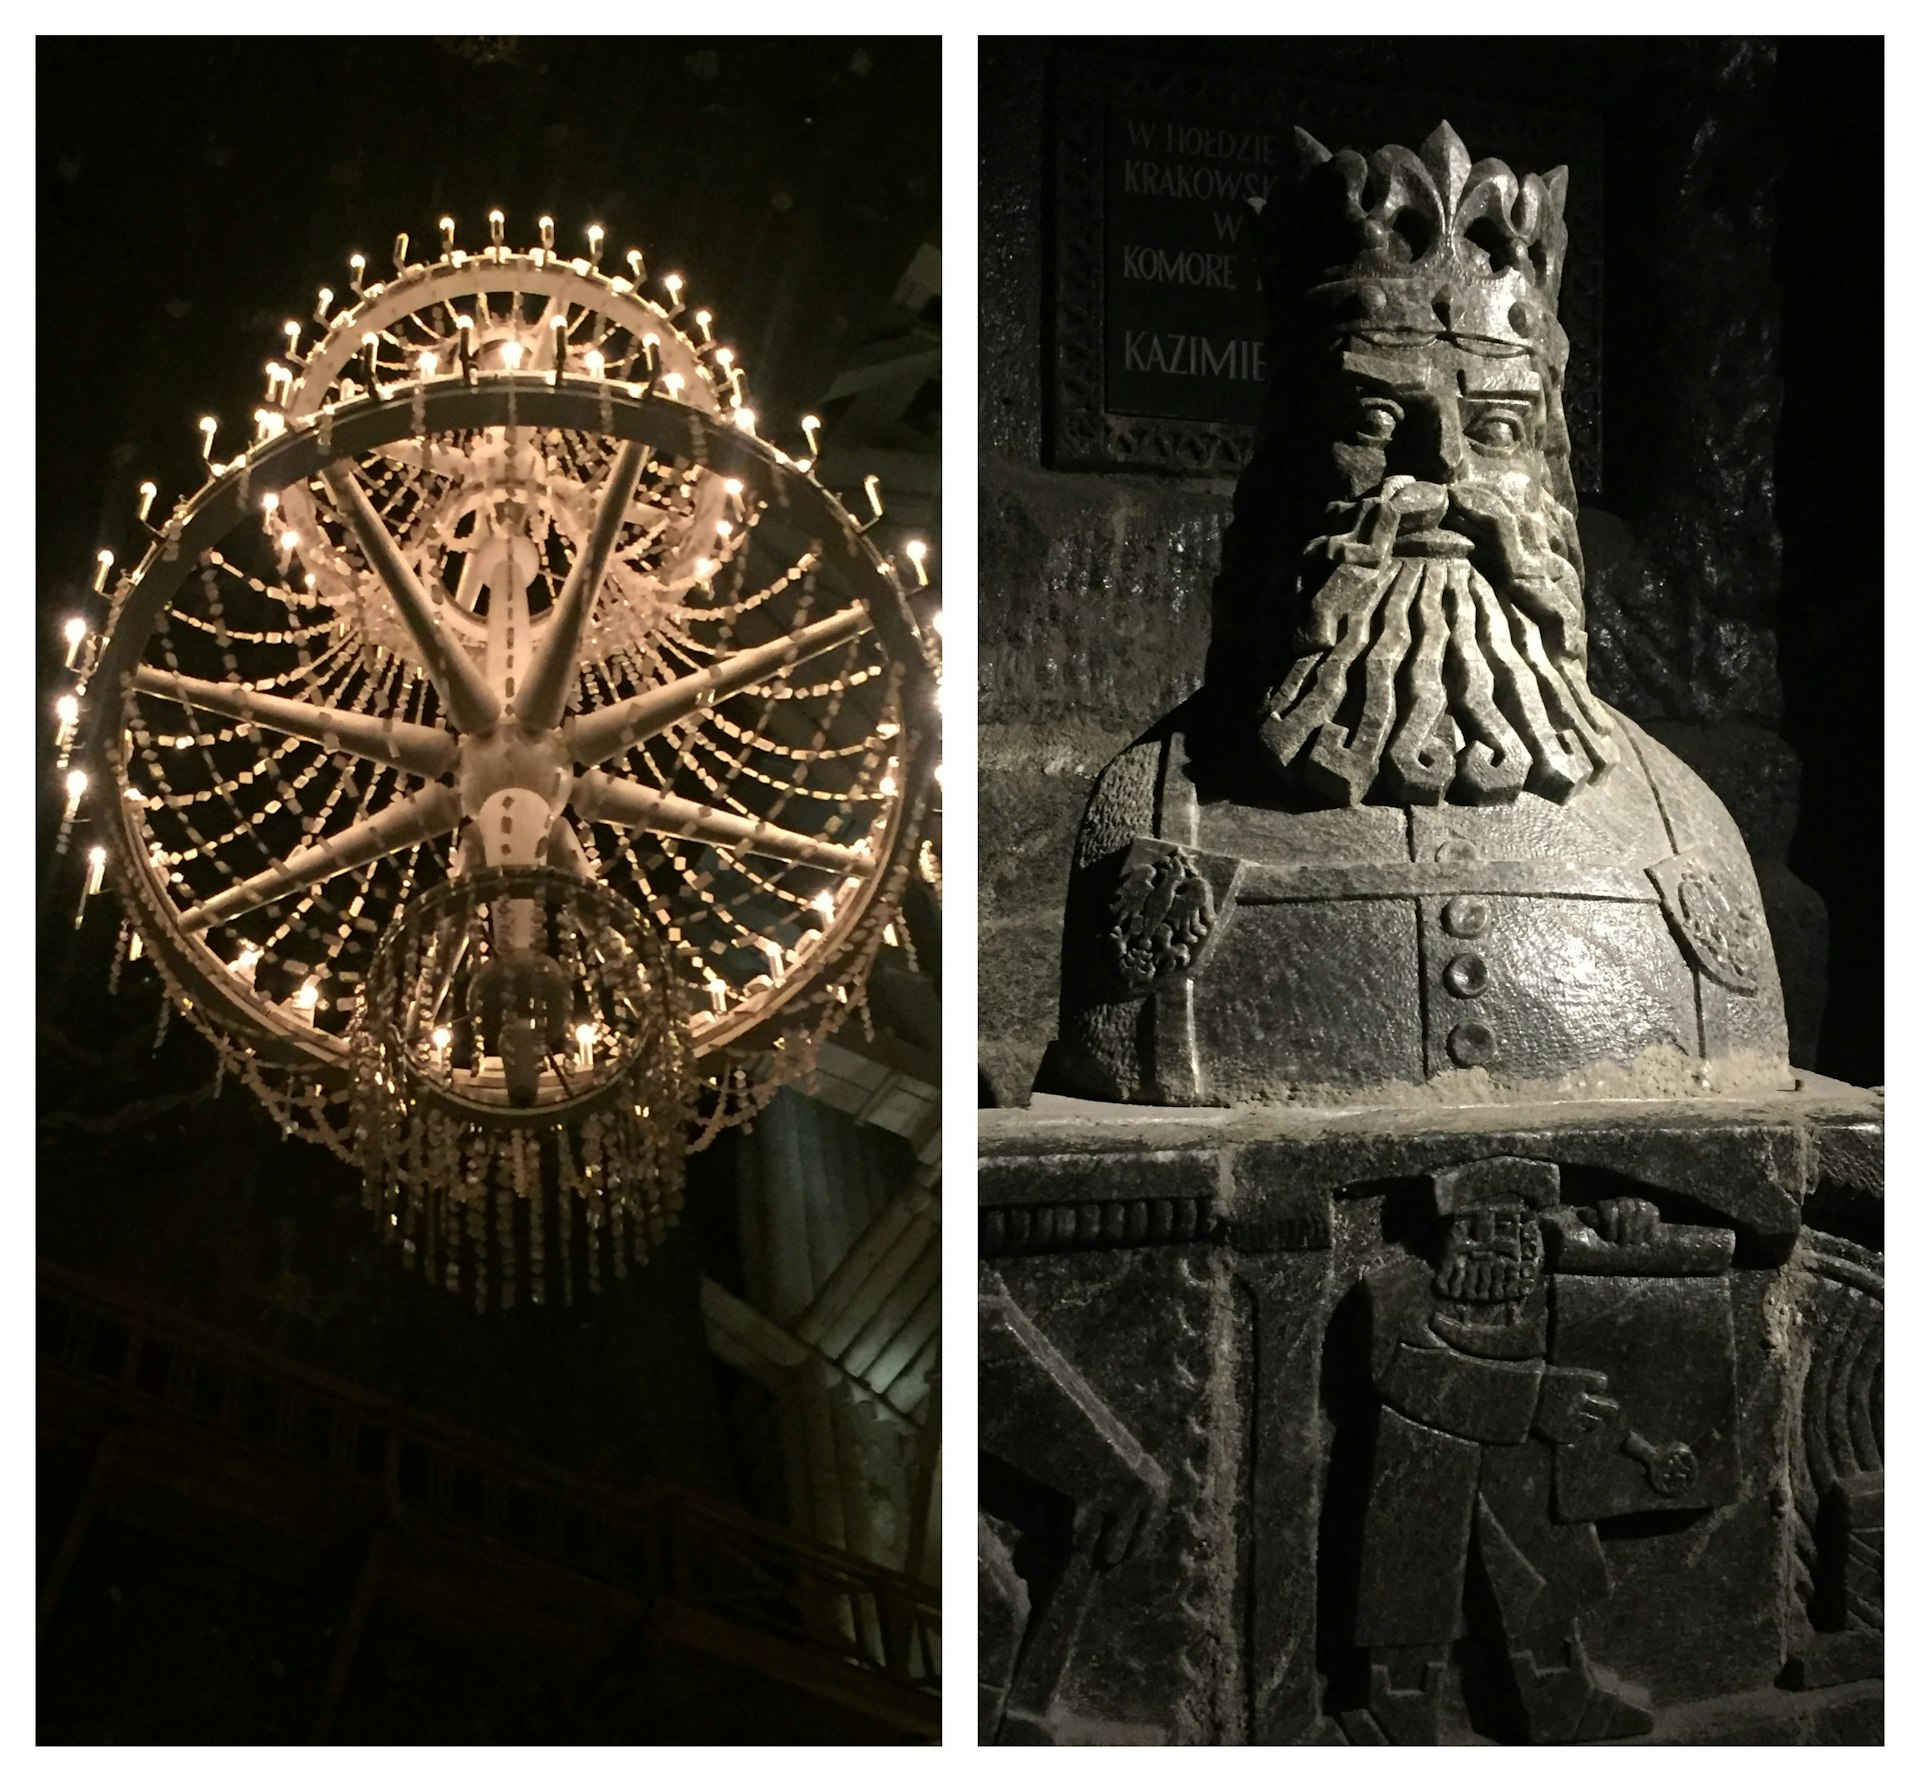 On the left a chandelier covered in salt. On the right a carved stone figure of a king